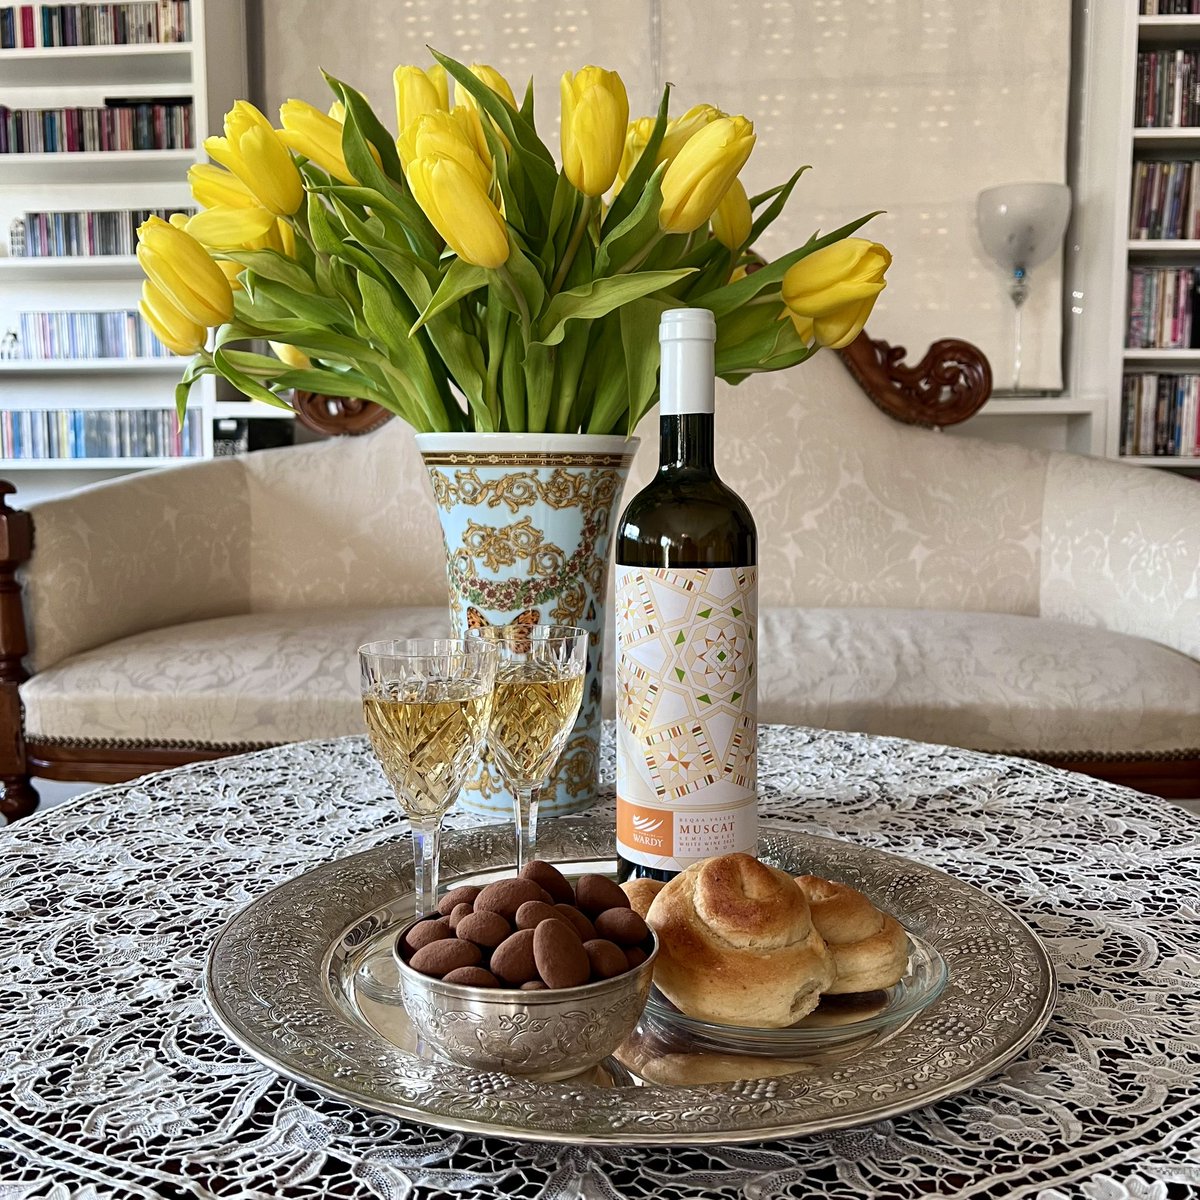 Instead of liqueur,this Easter Sunday we’ll be serving our delicious semi-sweet #Muscat.

Happy Easter

#wine #whitewine #semisweet #mediumsweet #vegan #sustainable #awardwinning #lebanesewineries #winesoflebanon #easter #eastersunday #happyeaster #spring #lebanon #familybusiness